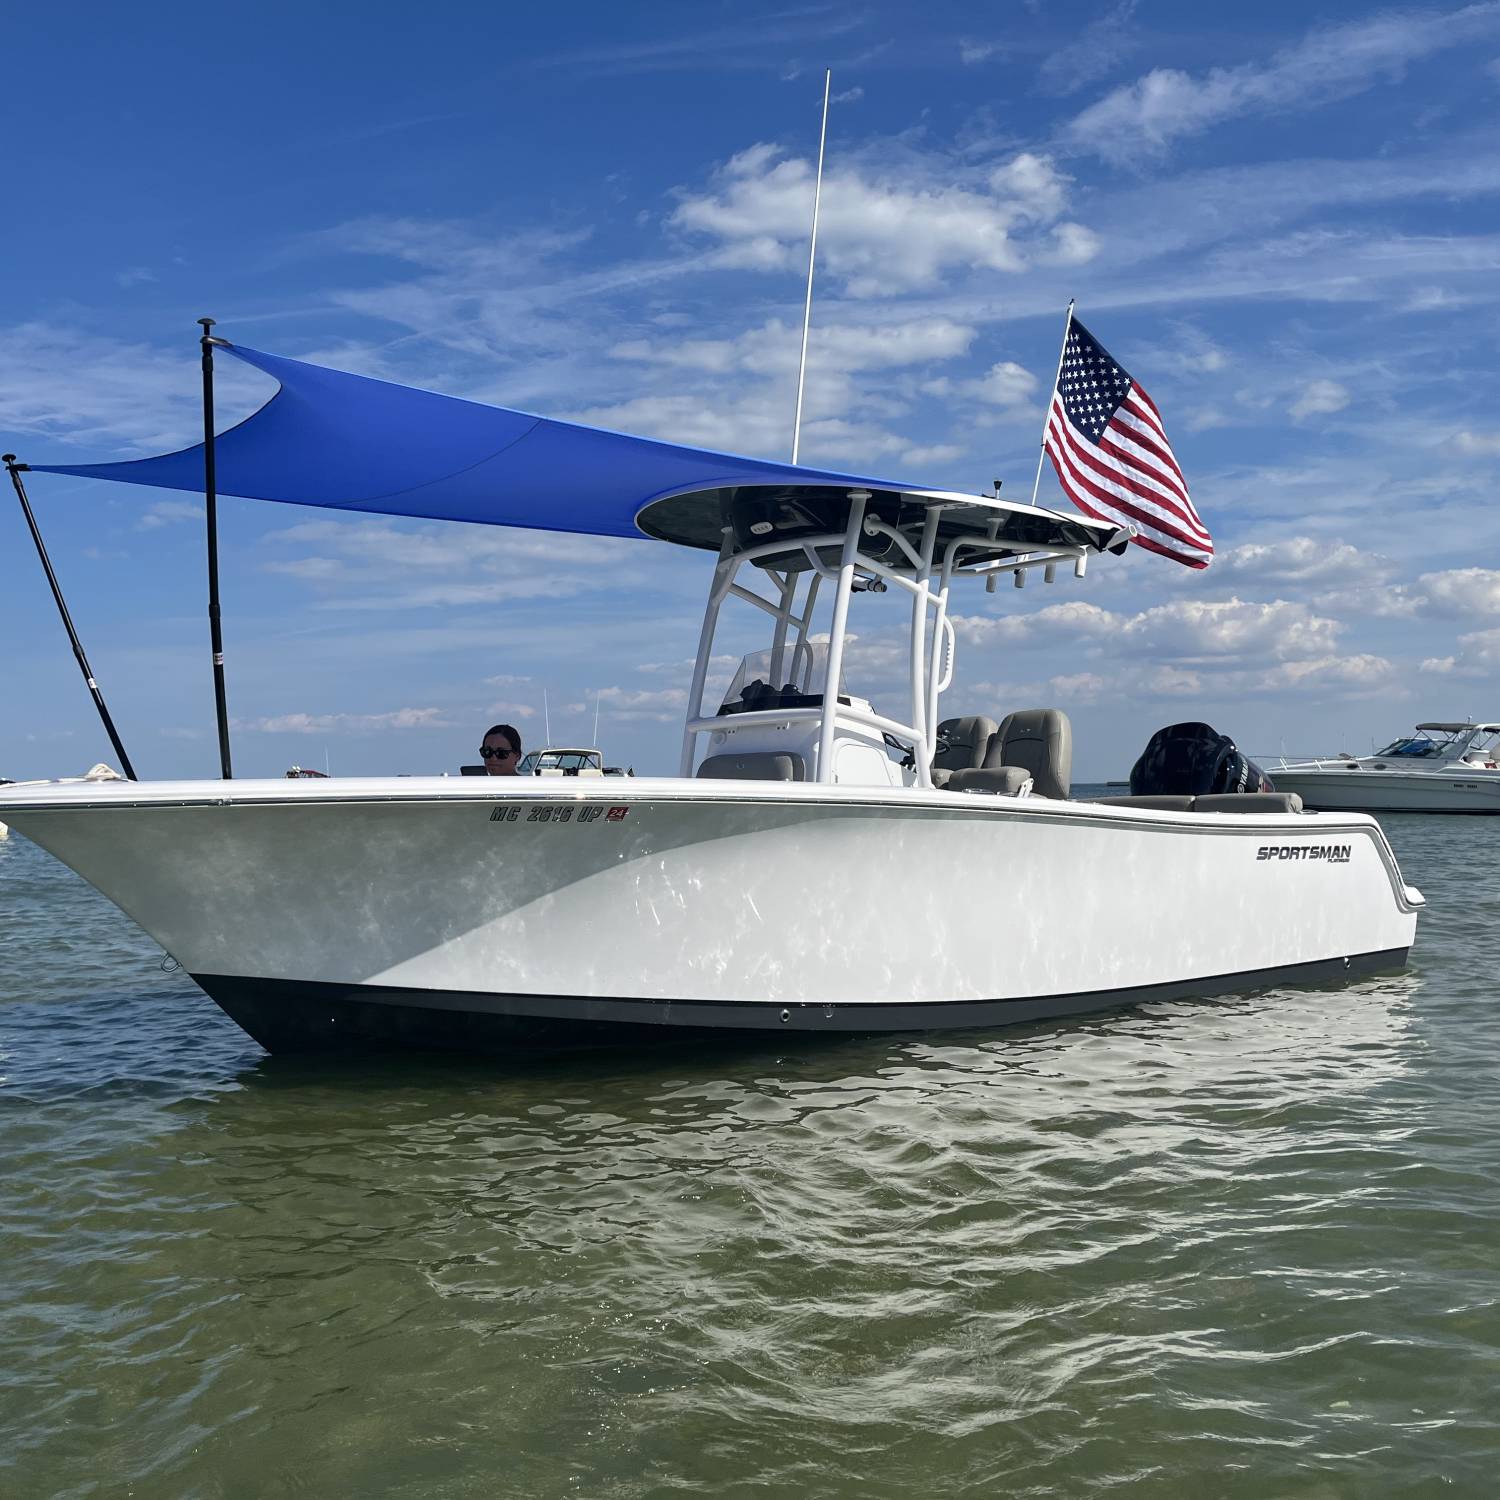 Title: 4th of July Sandbar - On board their Sportsman Heritage 231 Center Console - Location: Lake St. Clair. Participating in the Photo Contest #SportsmanJuly